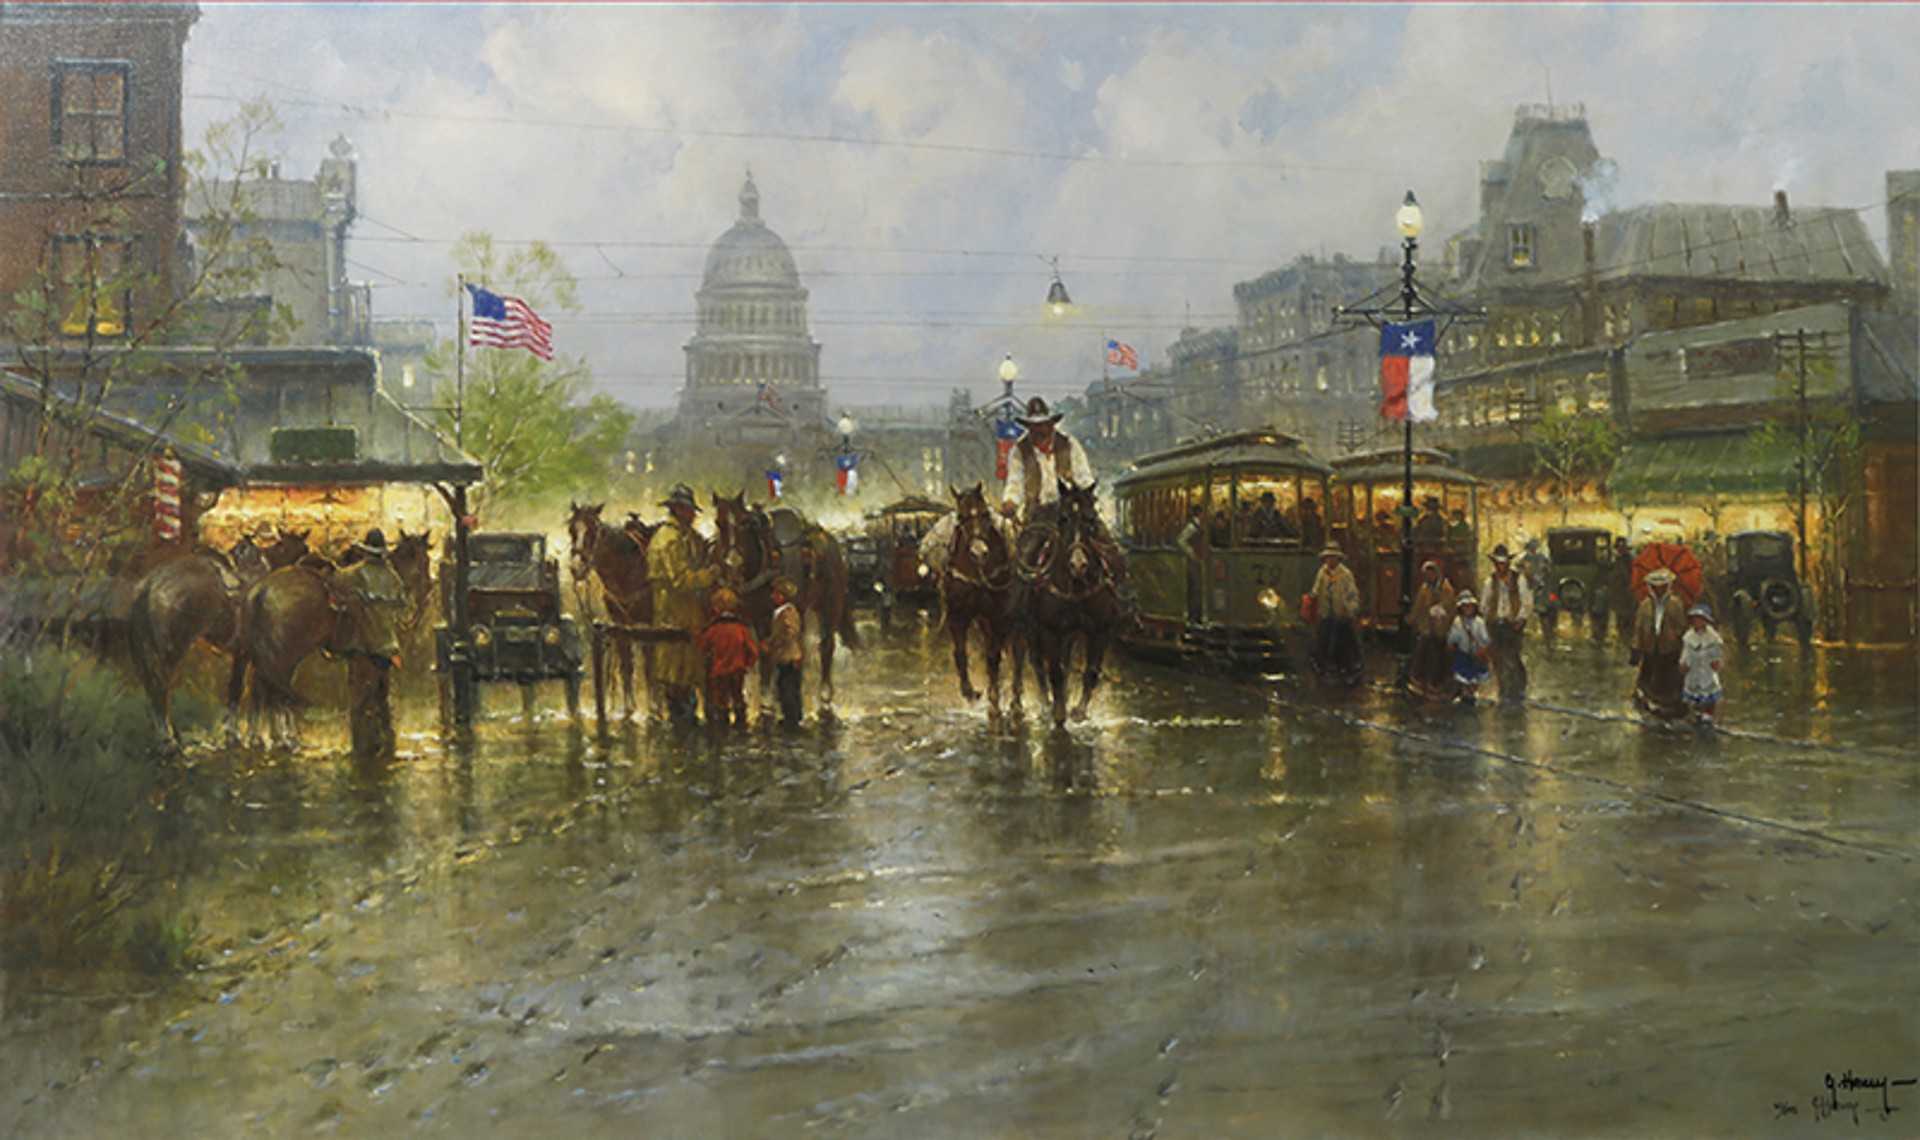 Cowhands and Trolleys by G. Harvey